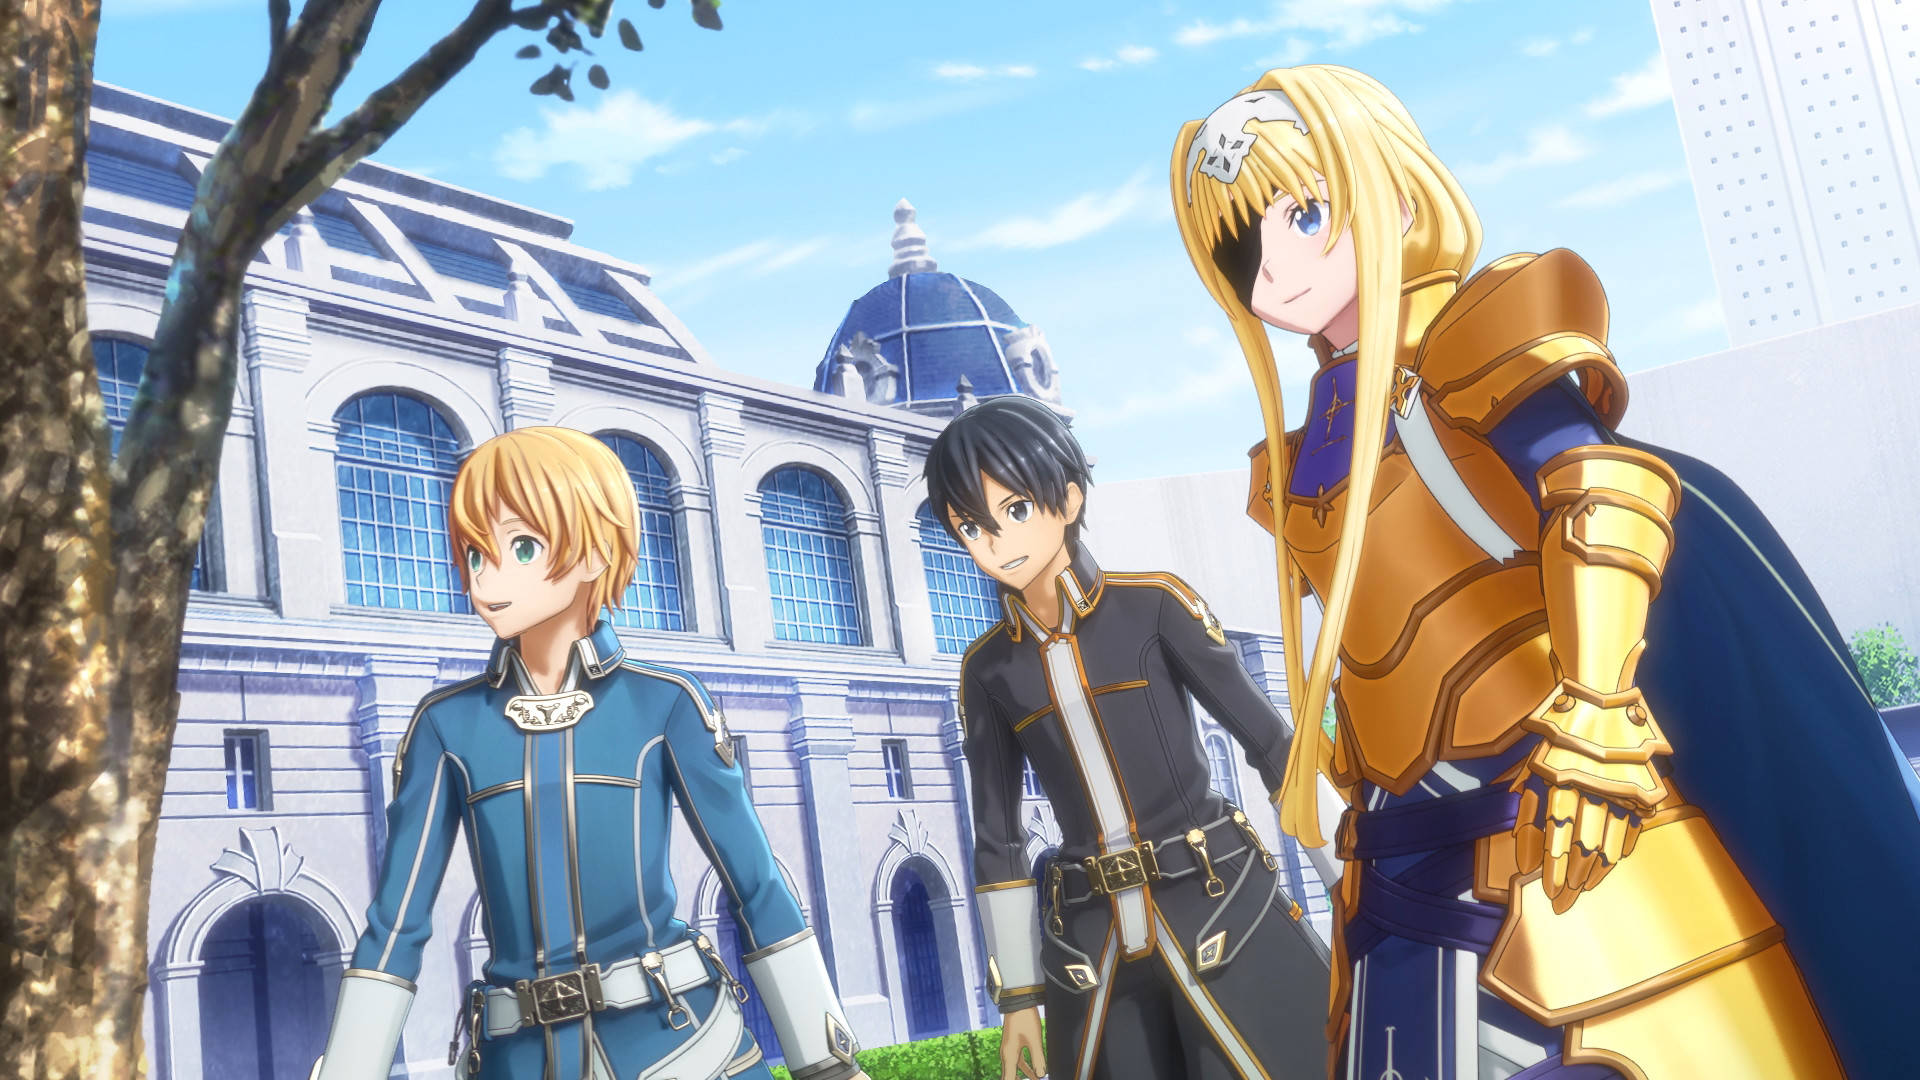 Kirito With Friends Background